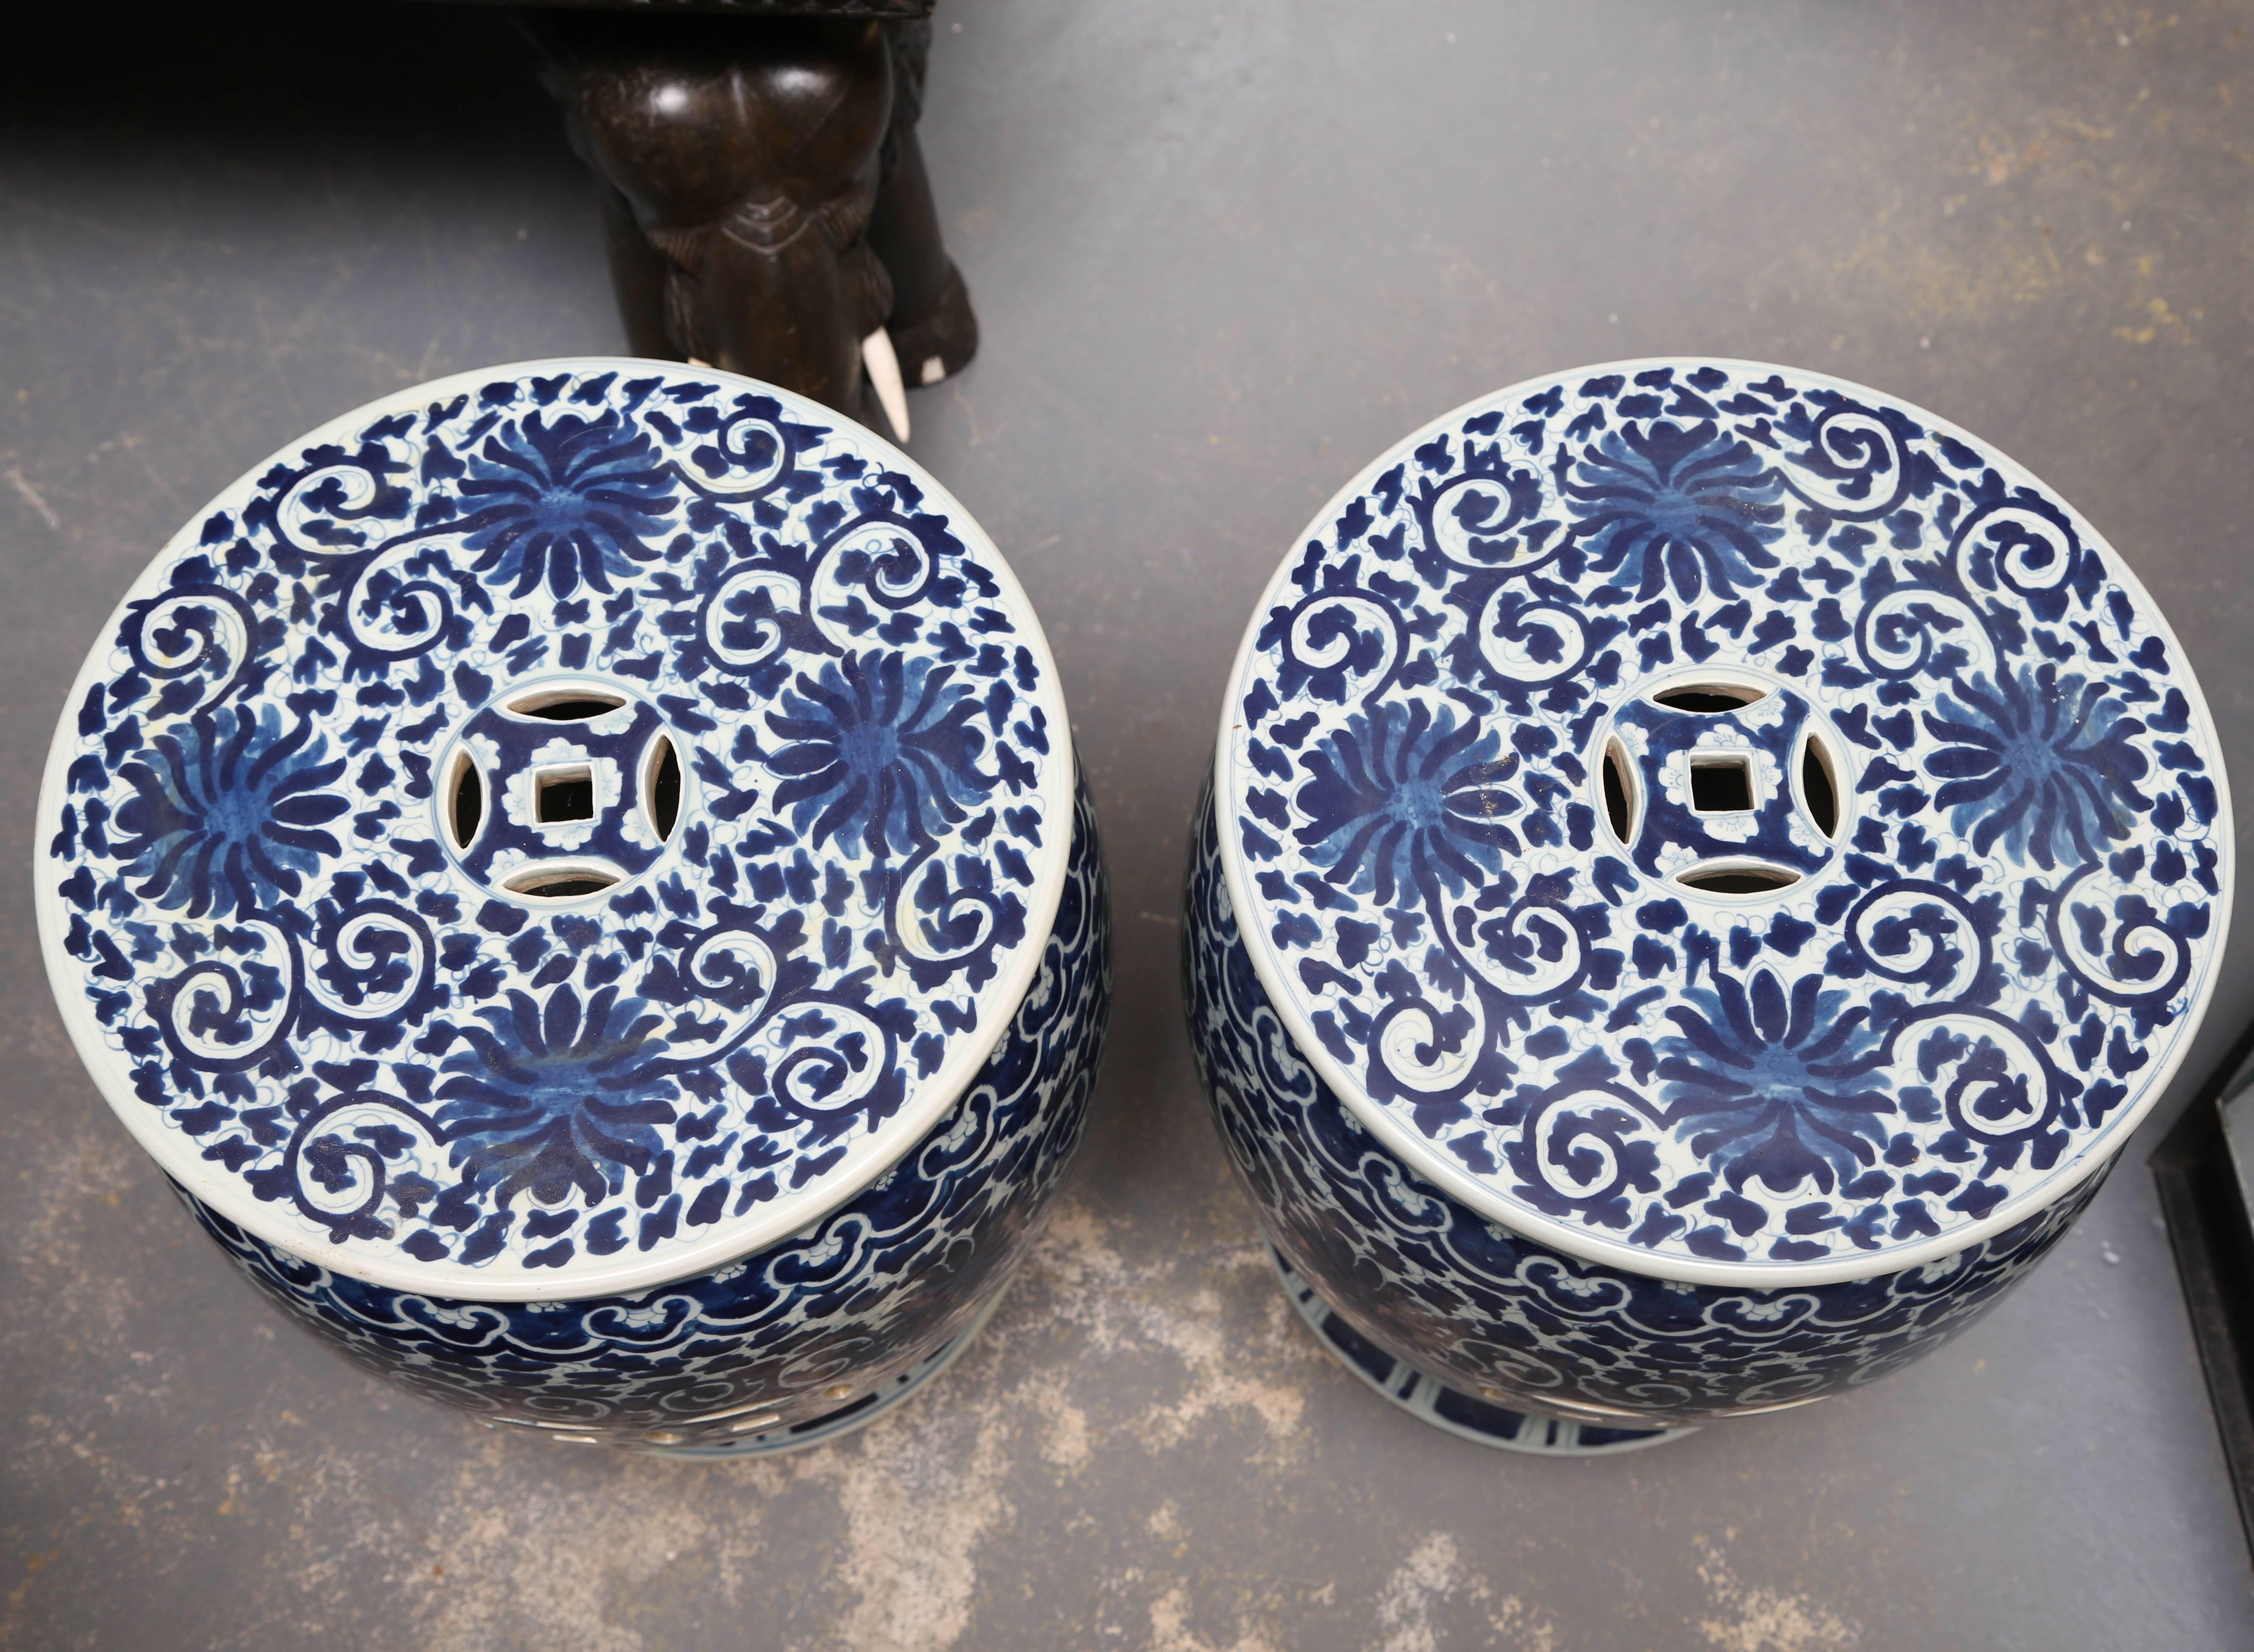 Rich blue color with pierced tops - elegant design and style.
This is a finely painted, yet heavy terracotta pair.